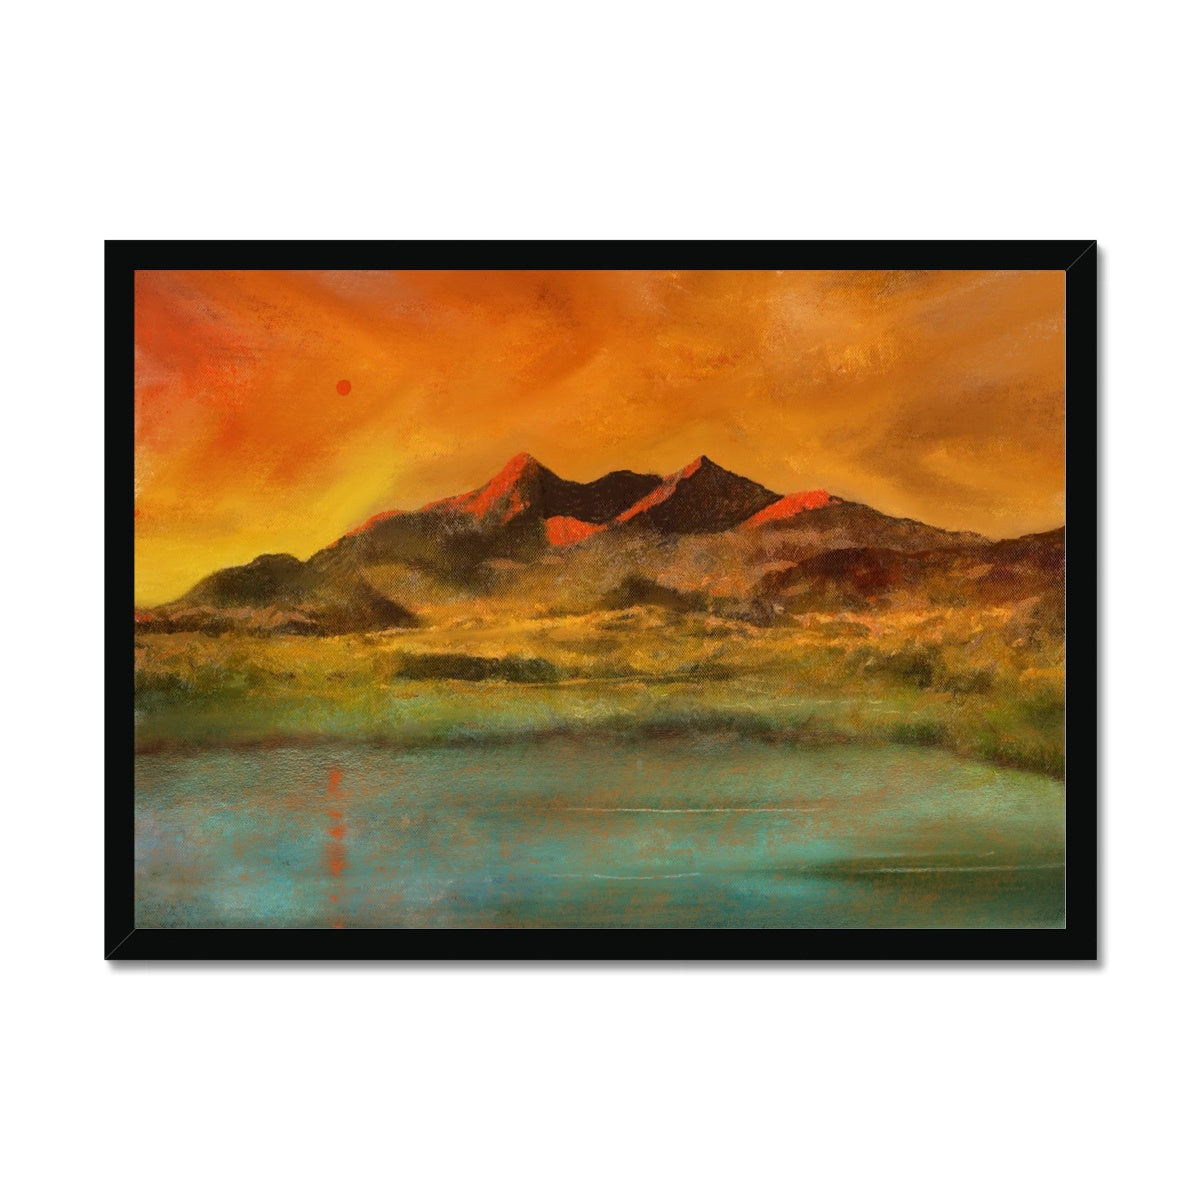 Skye Red Moon Cuilling Painting | Framed Prints From Scotland-Framed Prints-Skye Art Gallery-A2 Landscape-Black Frame-Paintings, Prints, Homeware, Art Gifts From Scotland By Scottish Artist Kevin Hunter